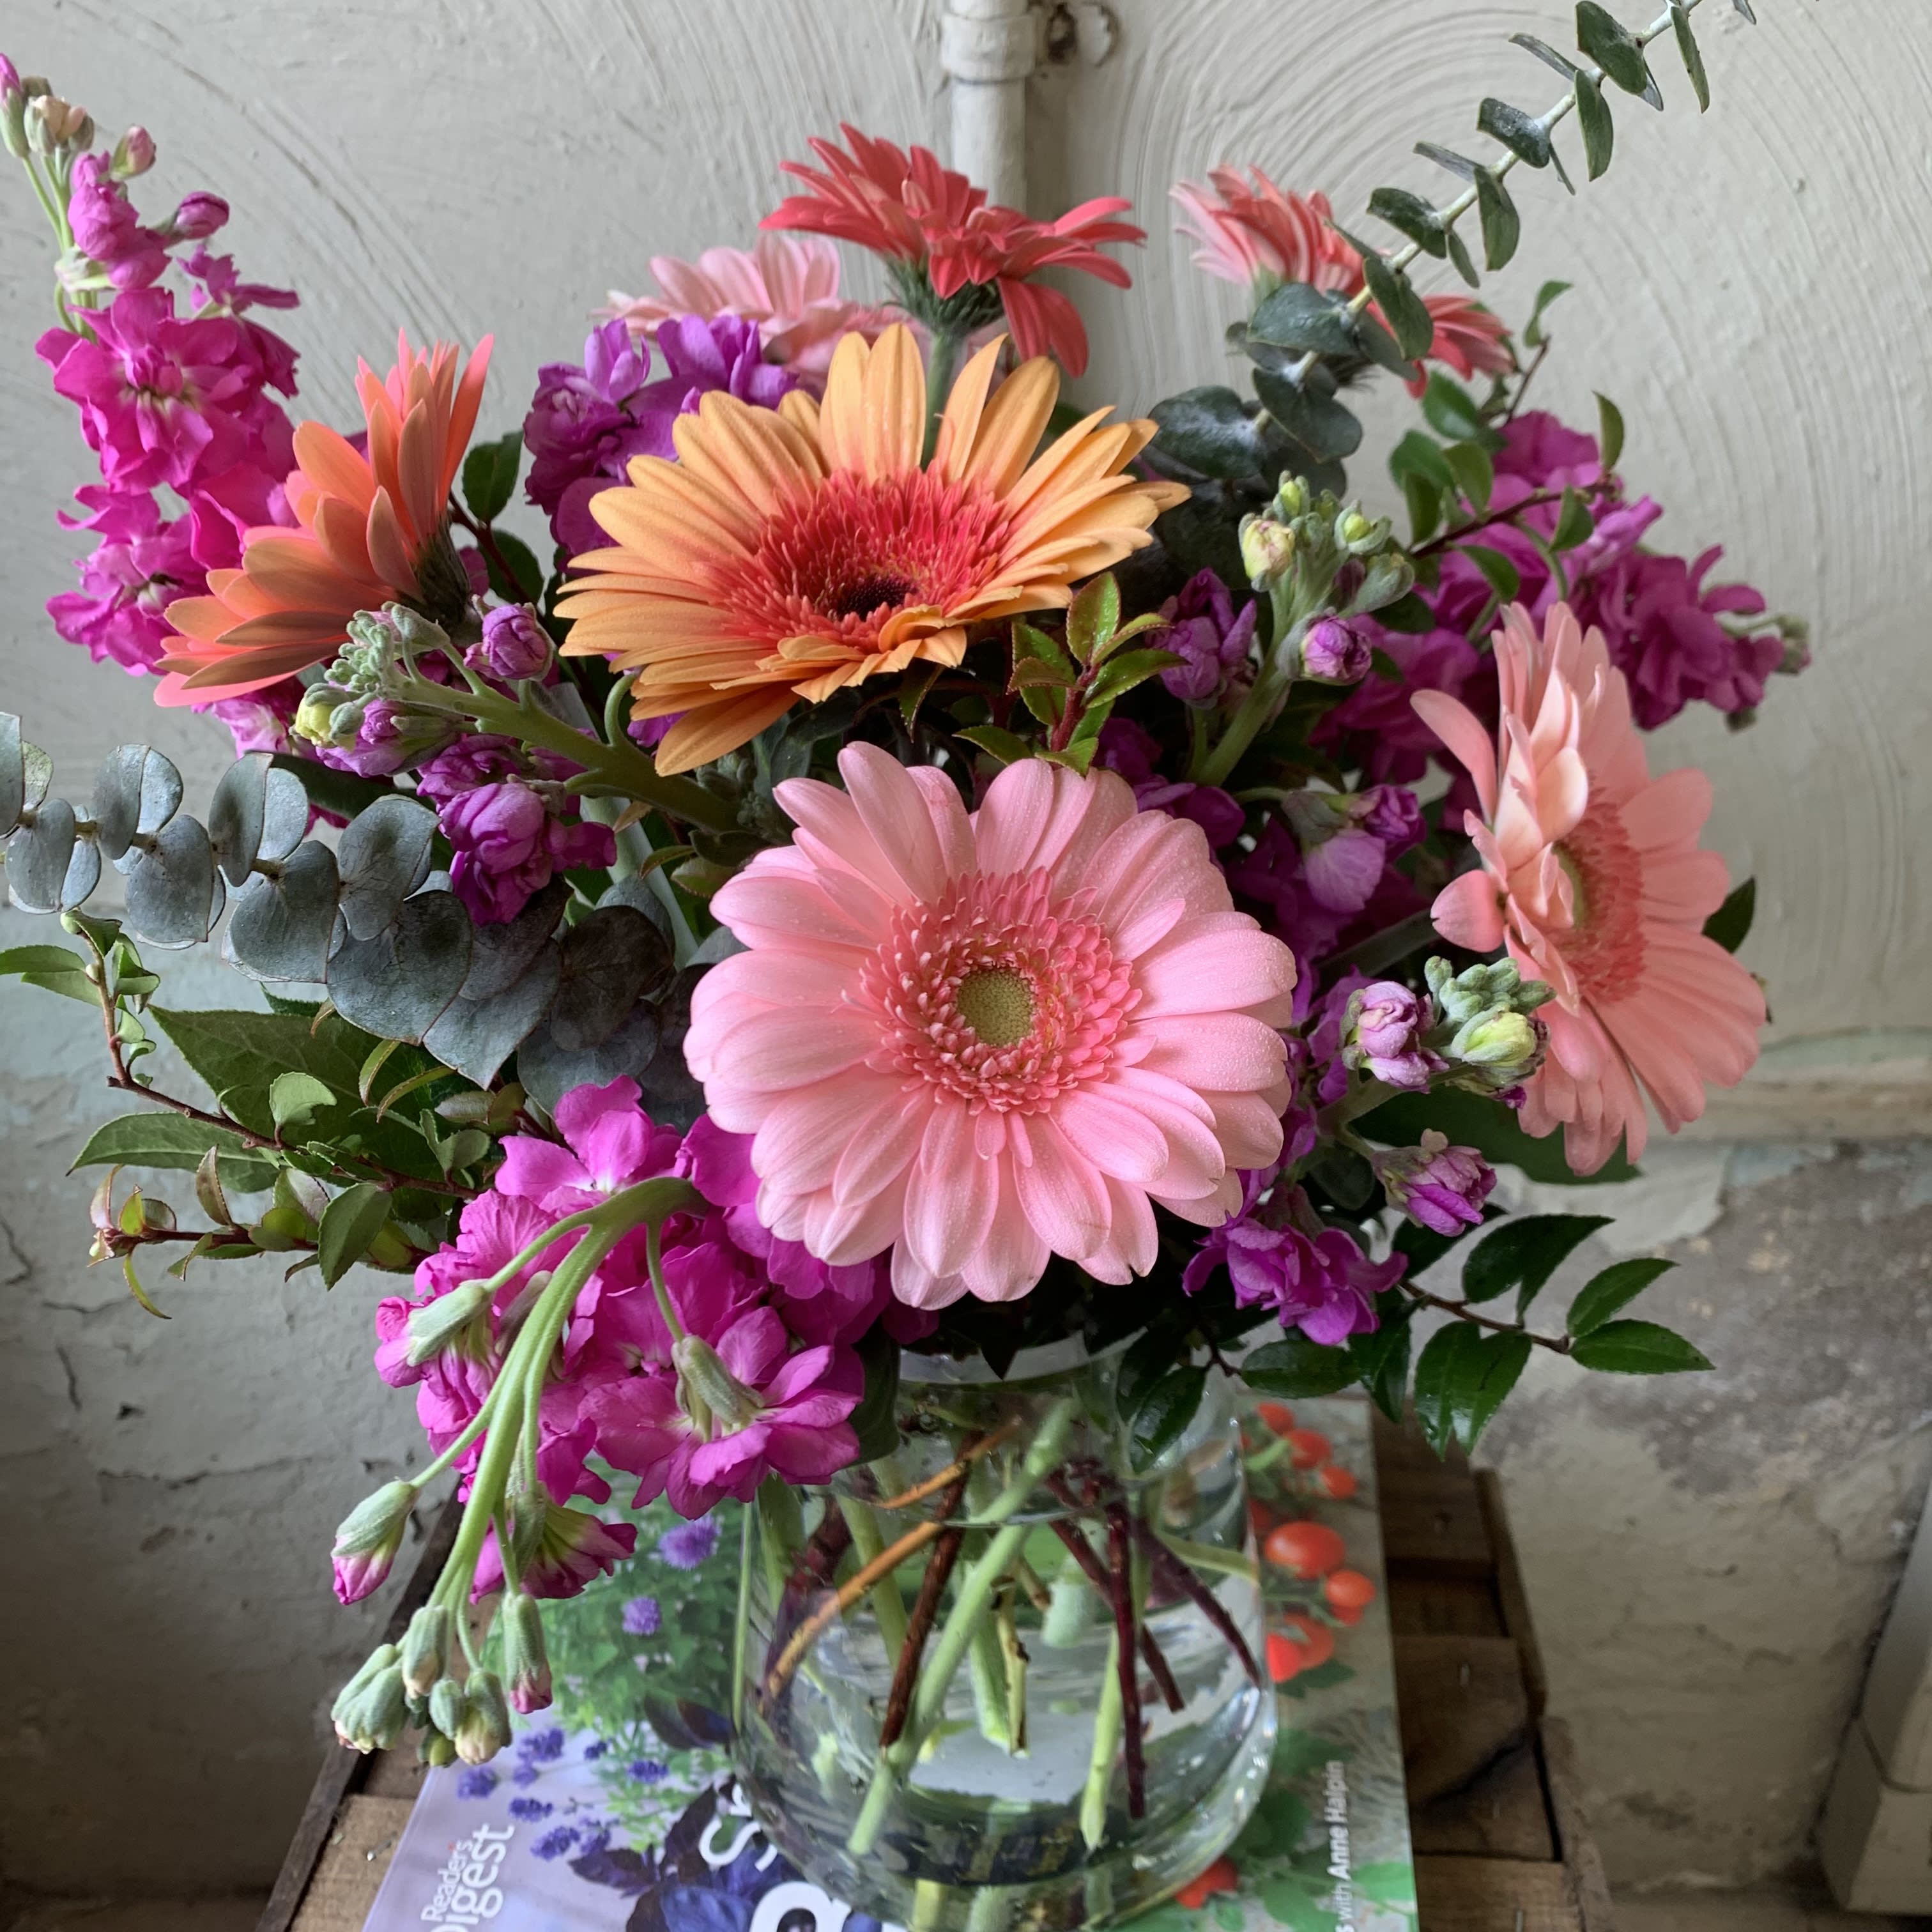 Crazy in Love Daisies  - Assorted gerbera daisies and stock (color may vary on availability)Send some love their way with these fun, fresh flowers!